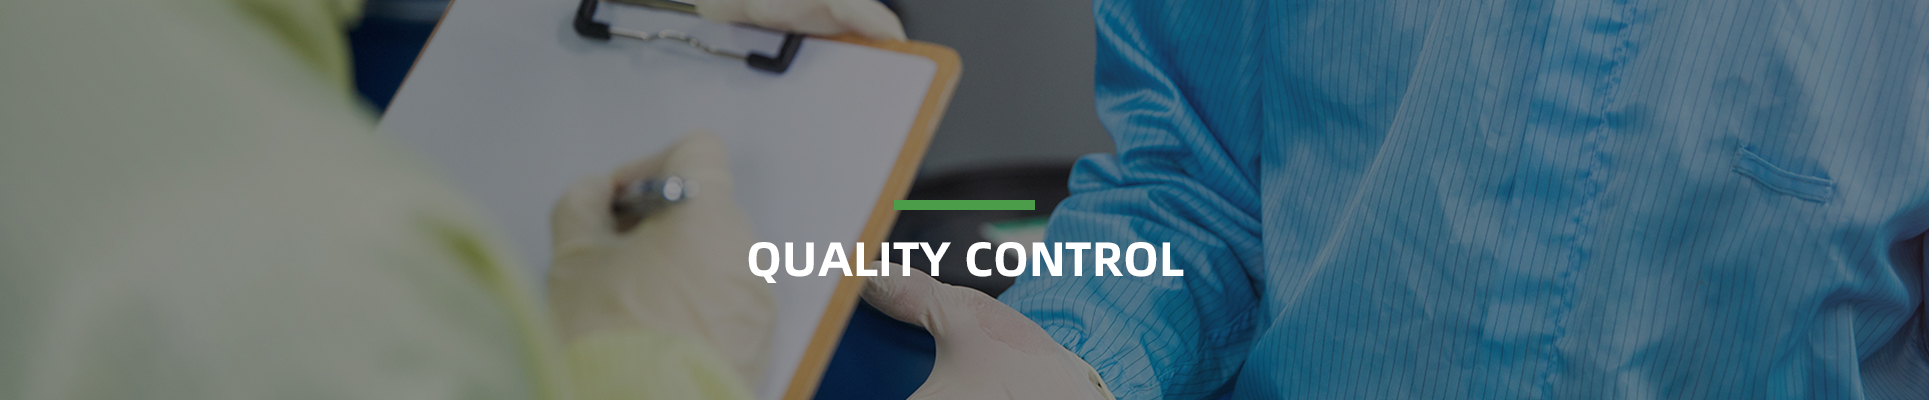 QUALITY CONTROL-banner